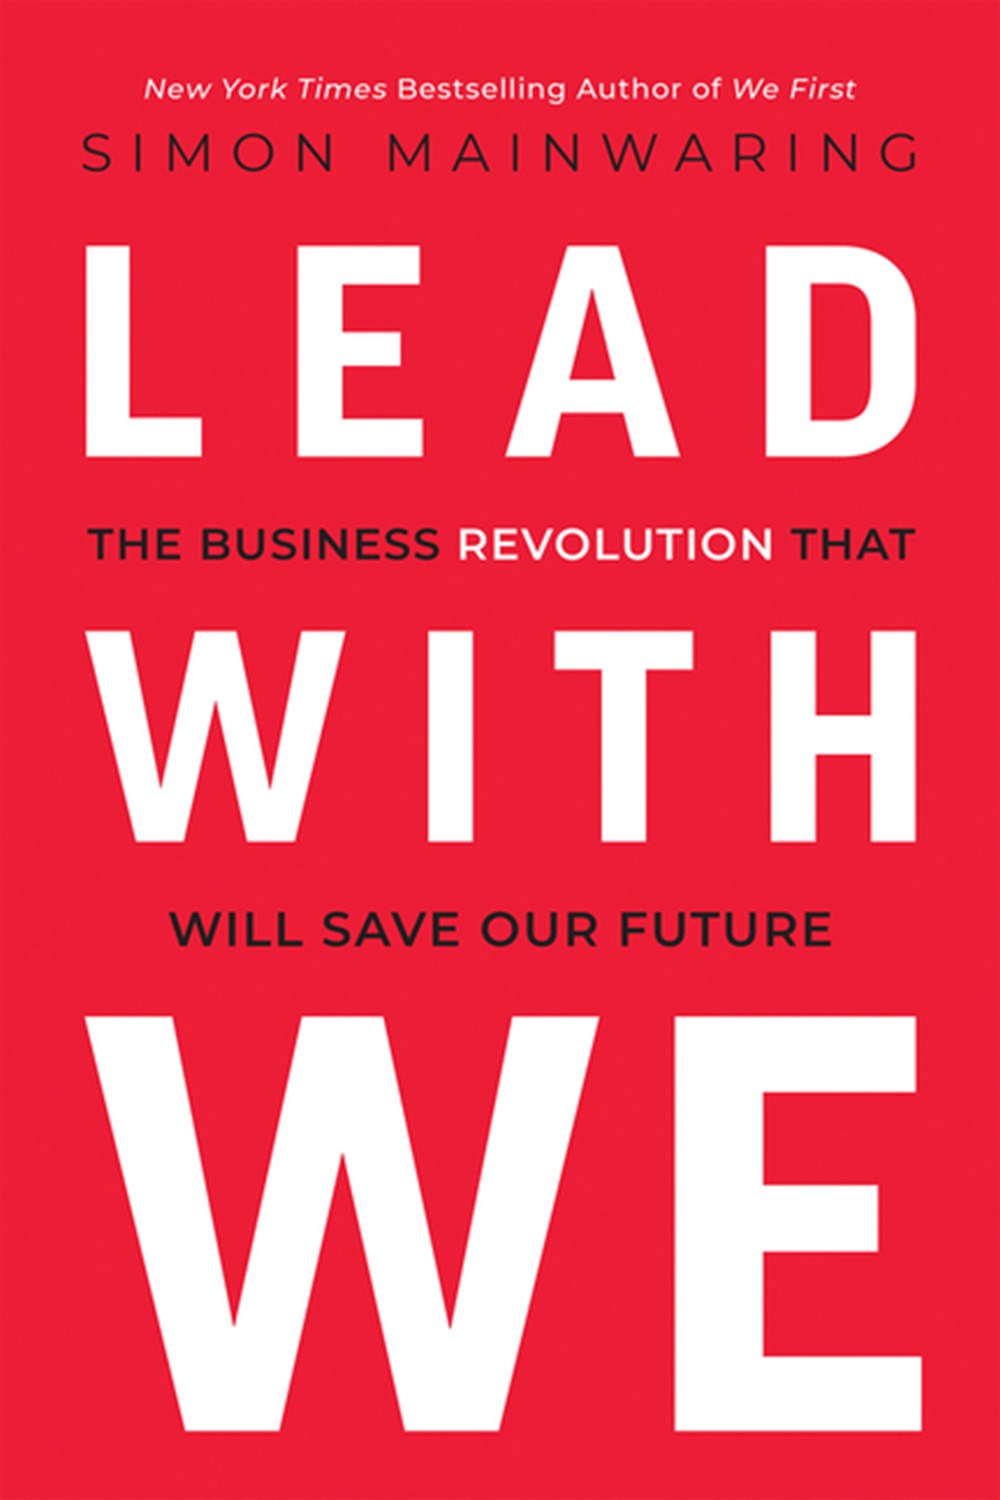 Lead with We The Business Revolution That Will Save Our Future